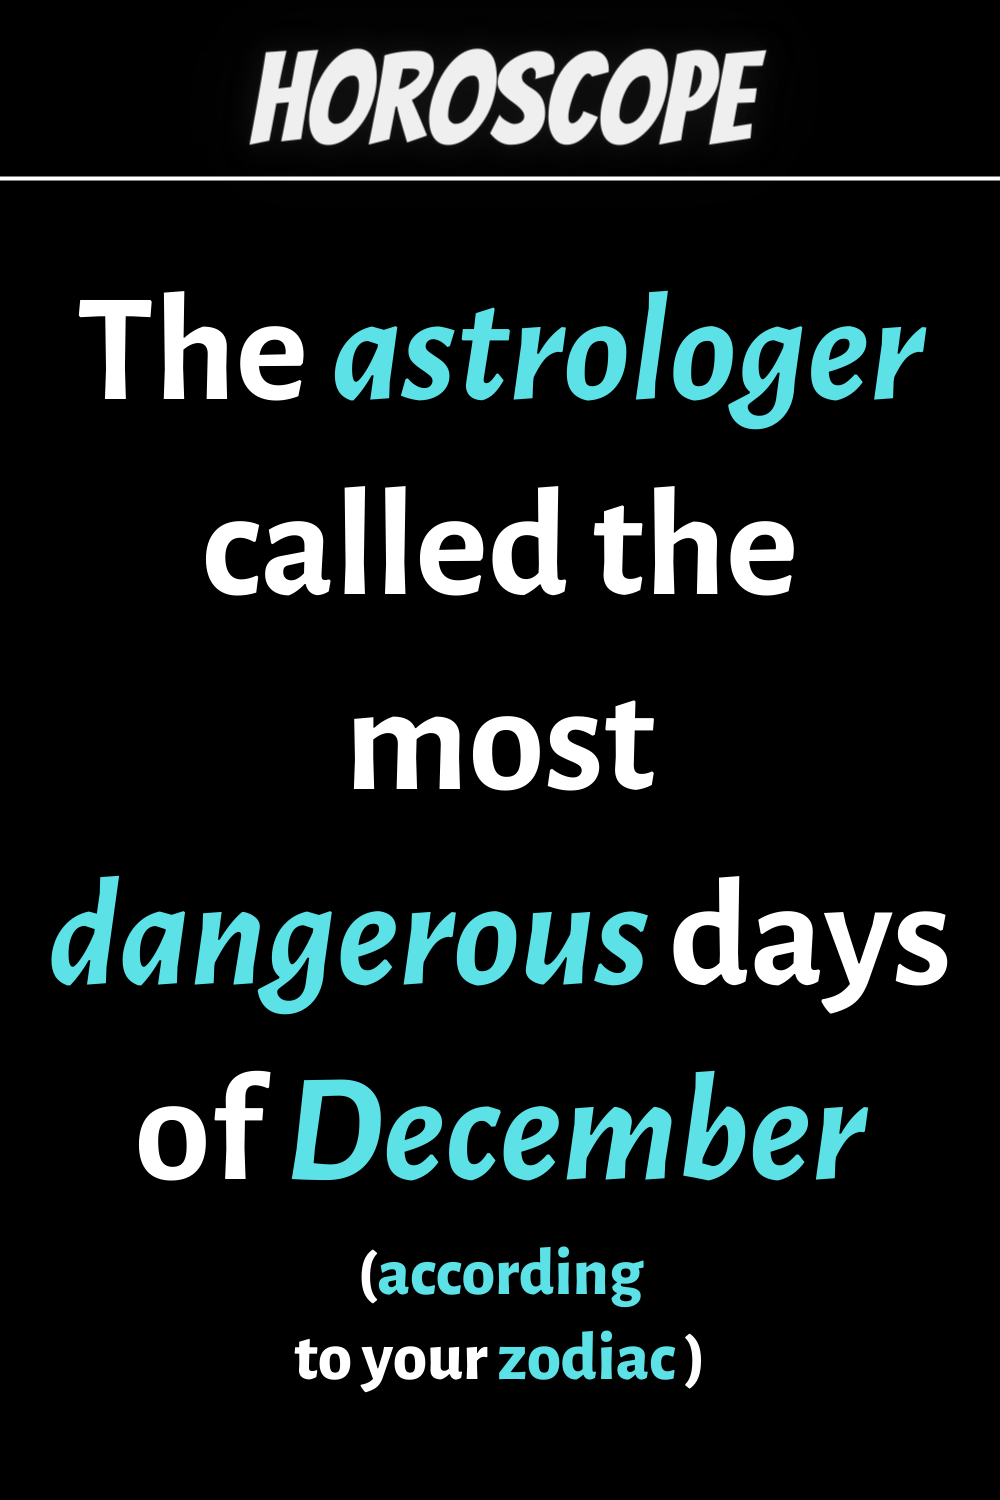 The astrologer called the most dangerous days of December